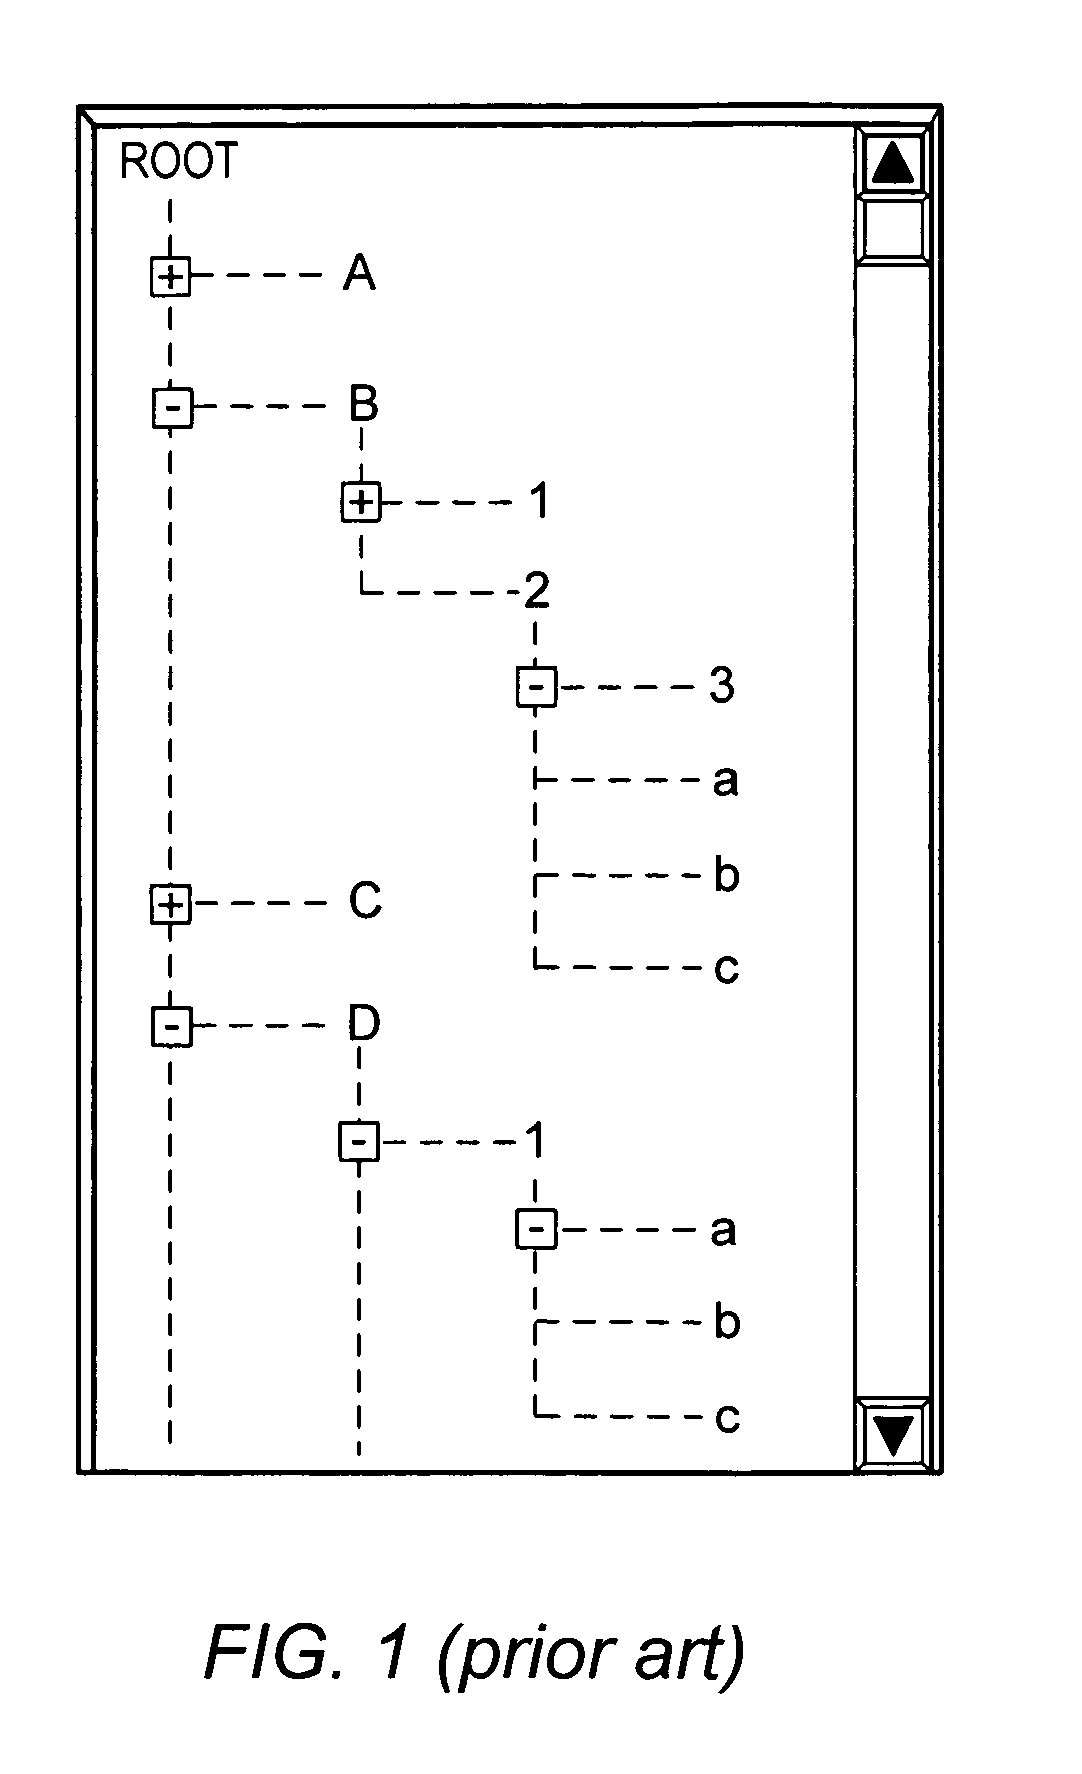 System and method for presenting information organized by hierarchical levels